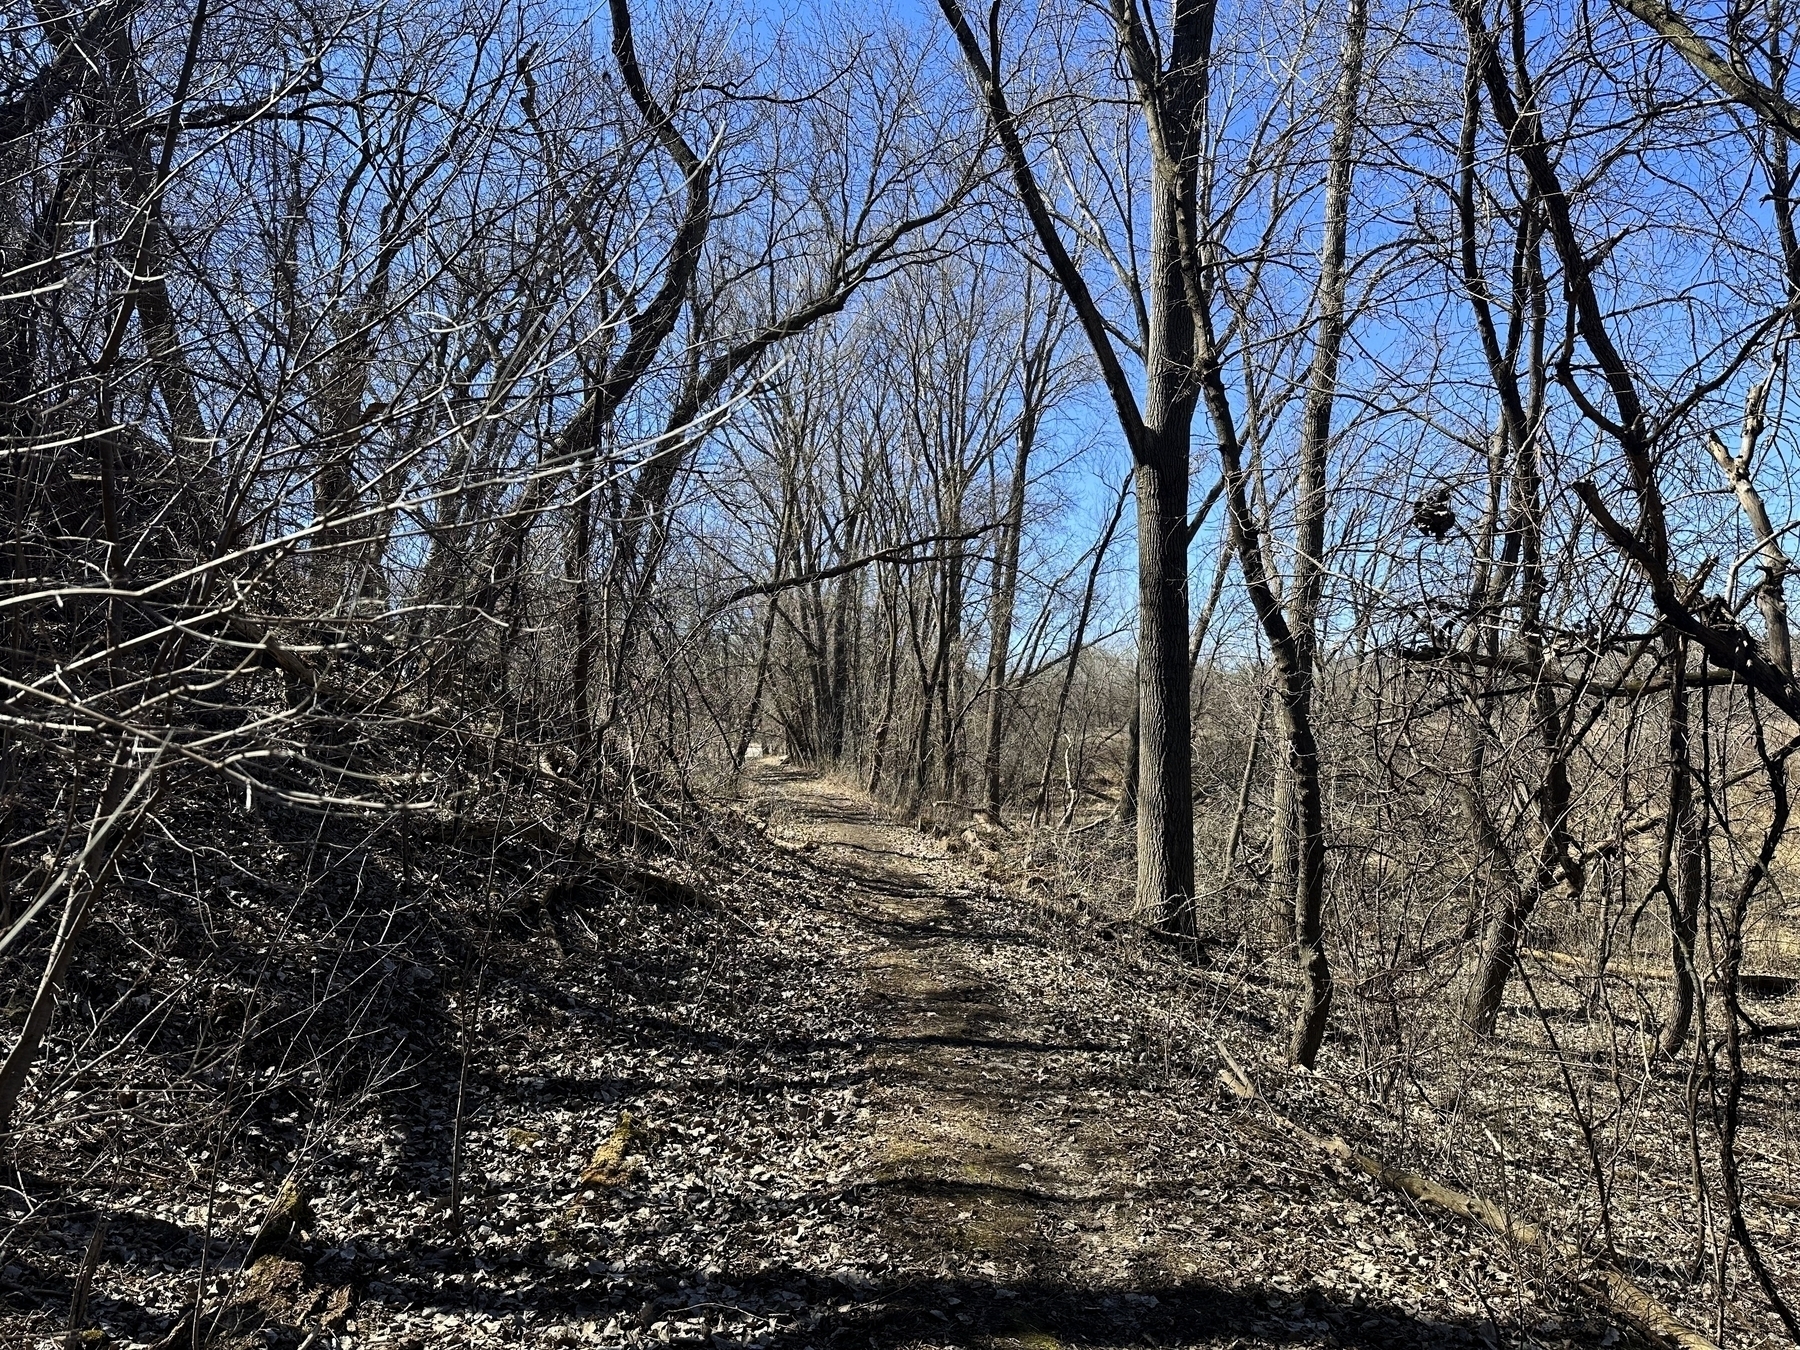 A leafless forest with a narrow trail amidst trees under a clear blue sky.